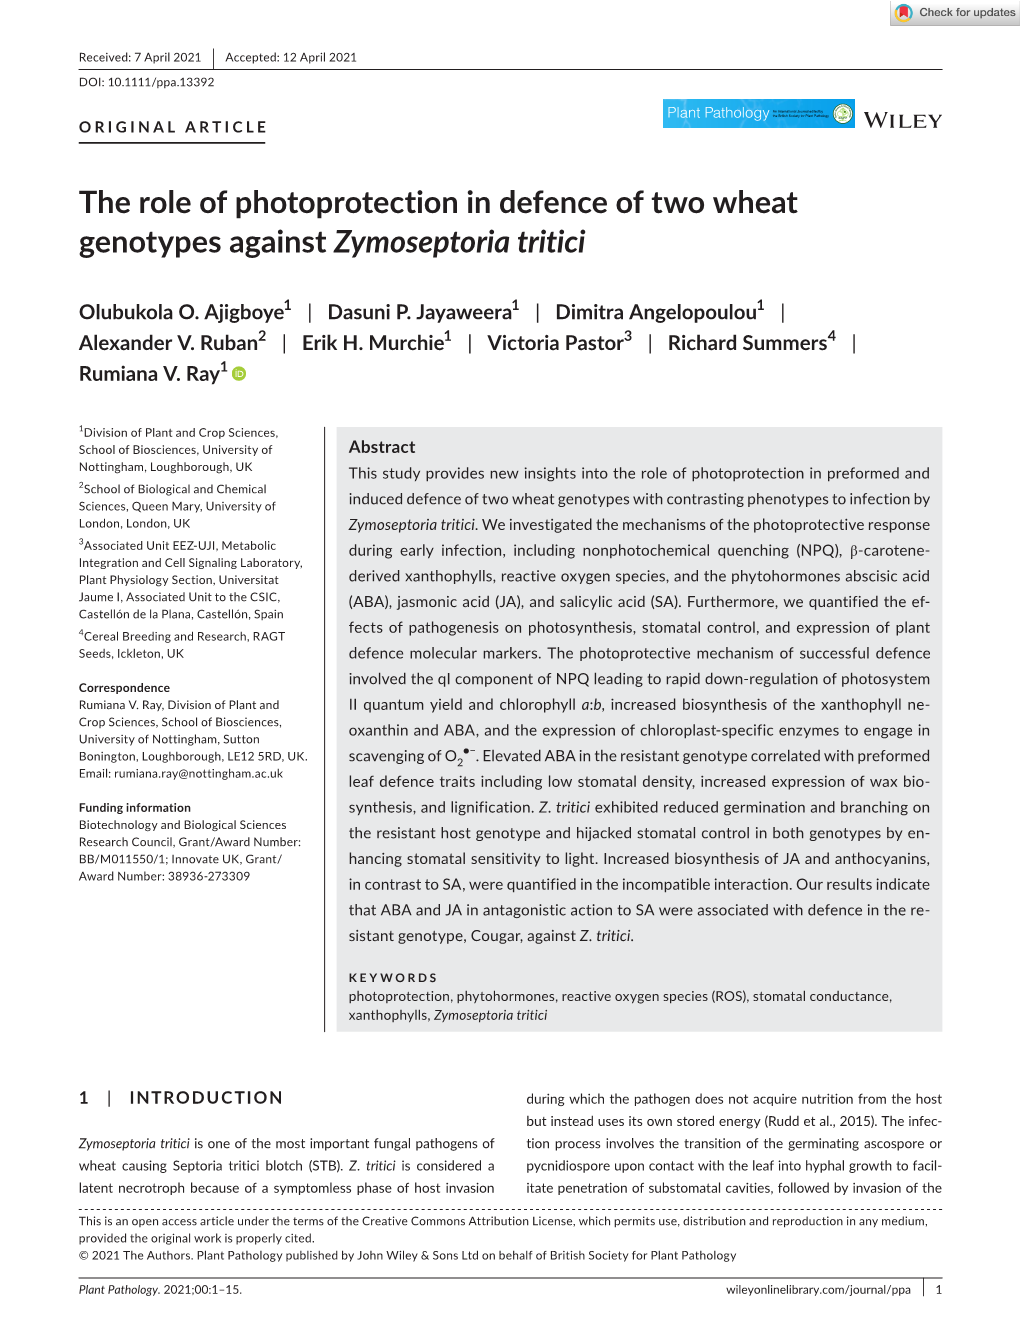 The Role of Photoprotection in Defence of Two Wheat Genotypes Against Zymoseptoria Tritici